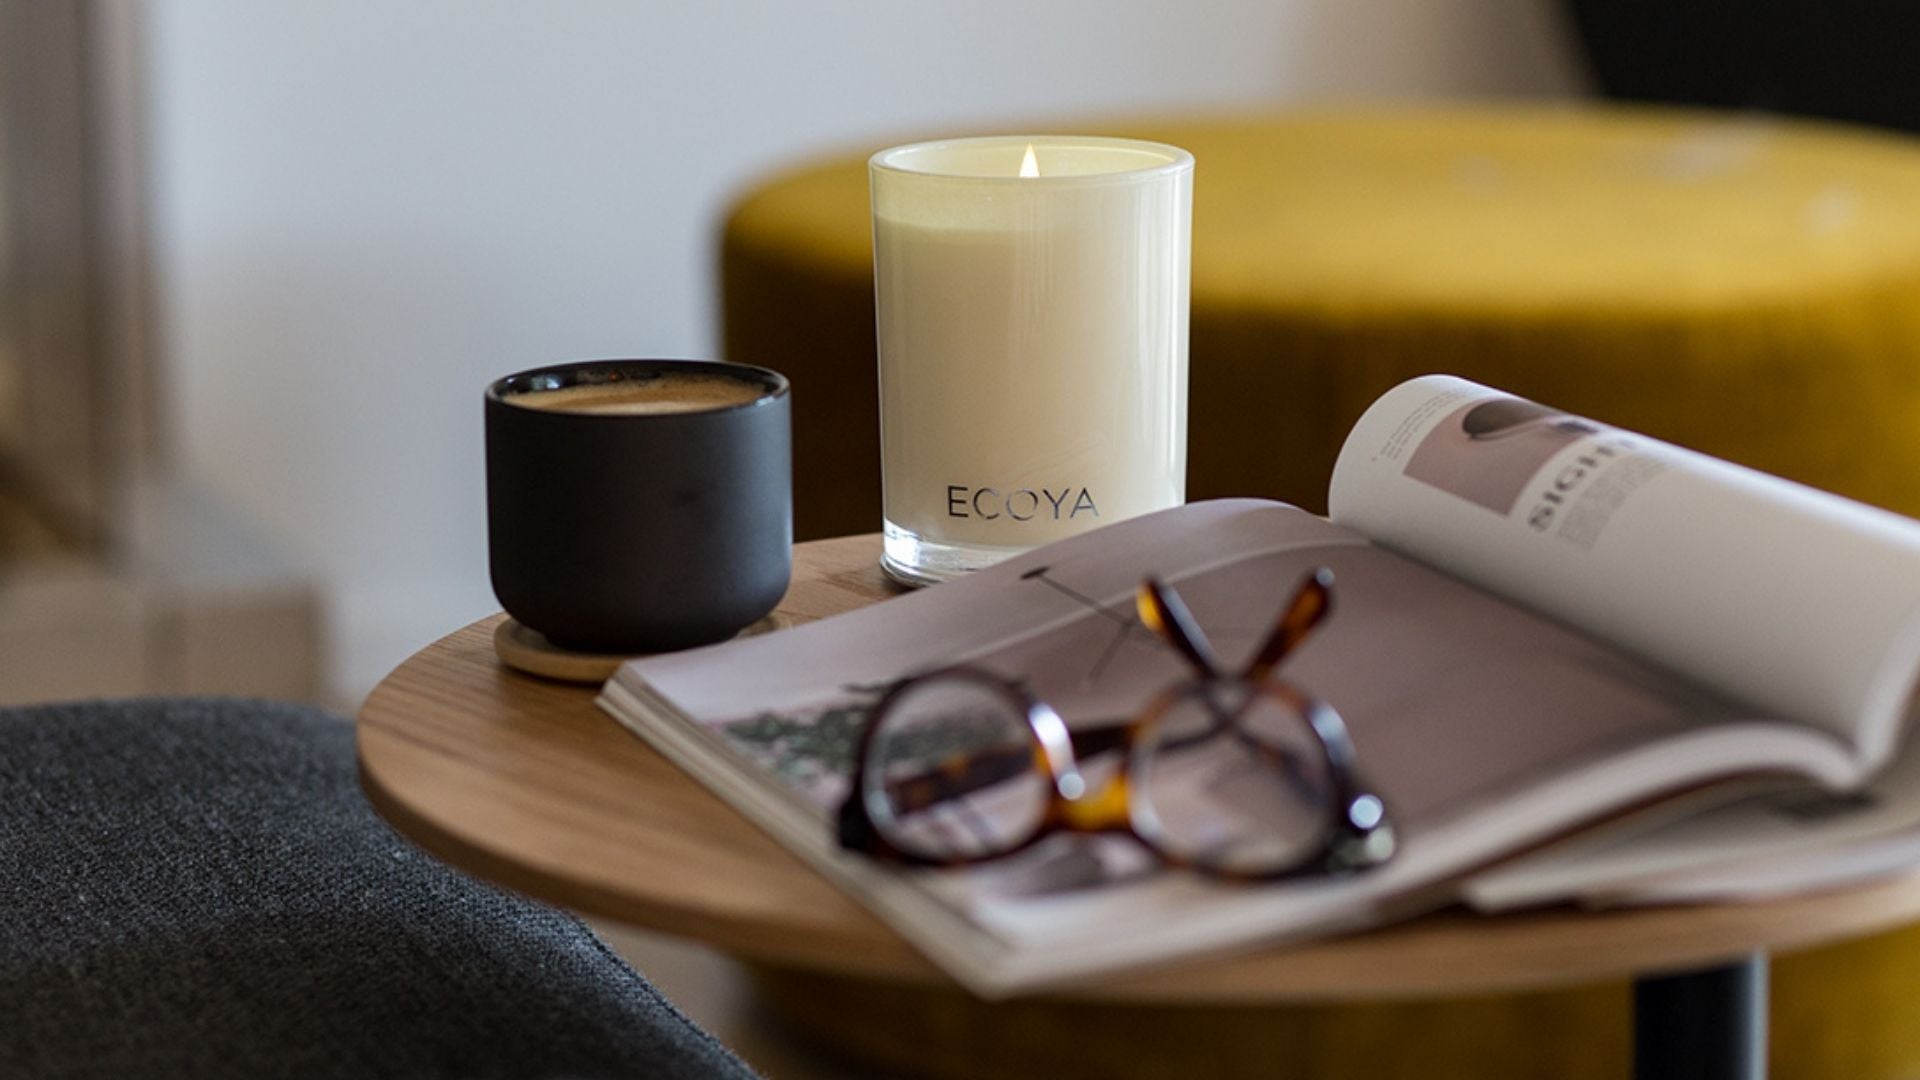 Ecoya candles, a magazine and glasses on a coffee table in the living room